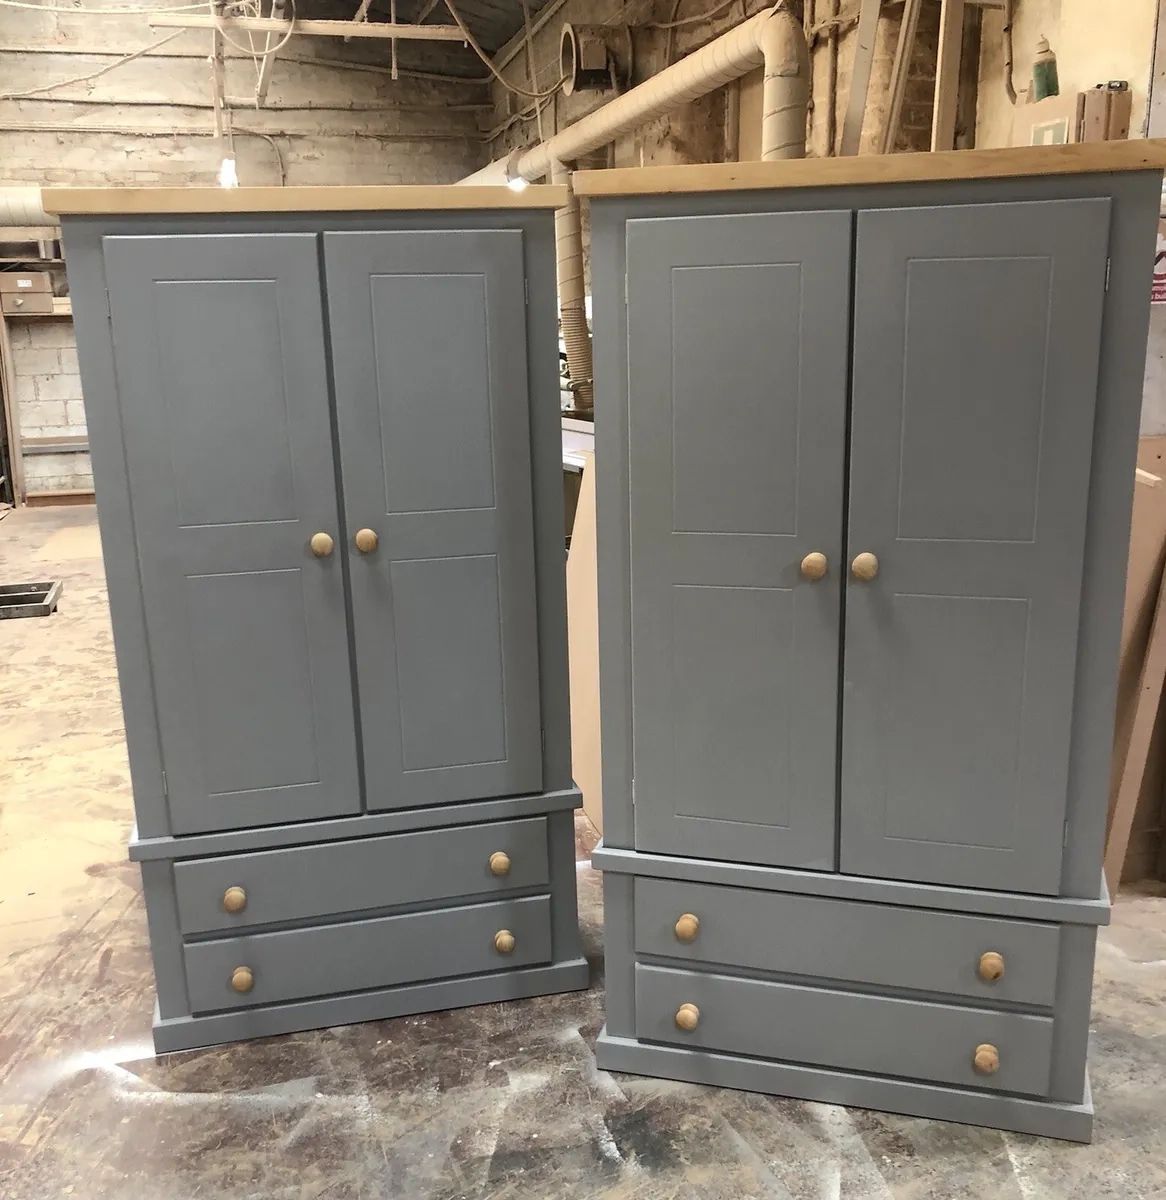 Handmade Aylesbury Grey Double Twin Wardrobes For Sale … | Ebay Throughout Cheap Double Wardrobes (View 7 of 15)